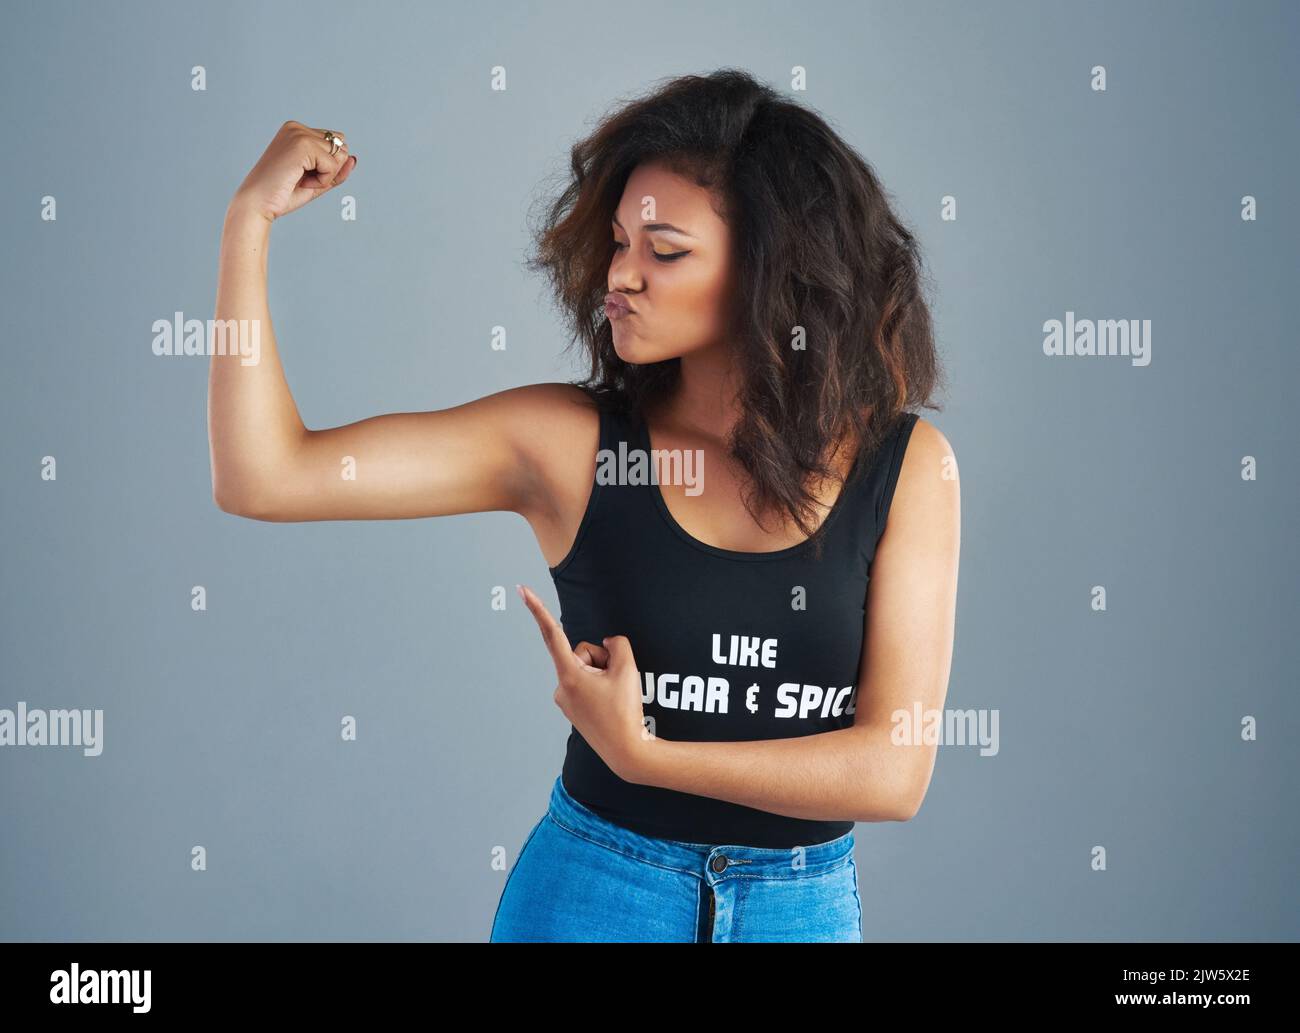 Check out those muscles. an attractive young woman posing against a gray background. Stock Photo